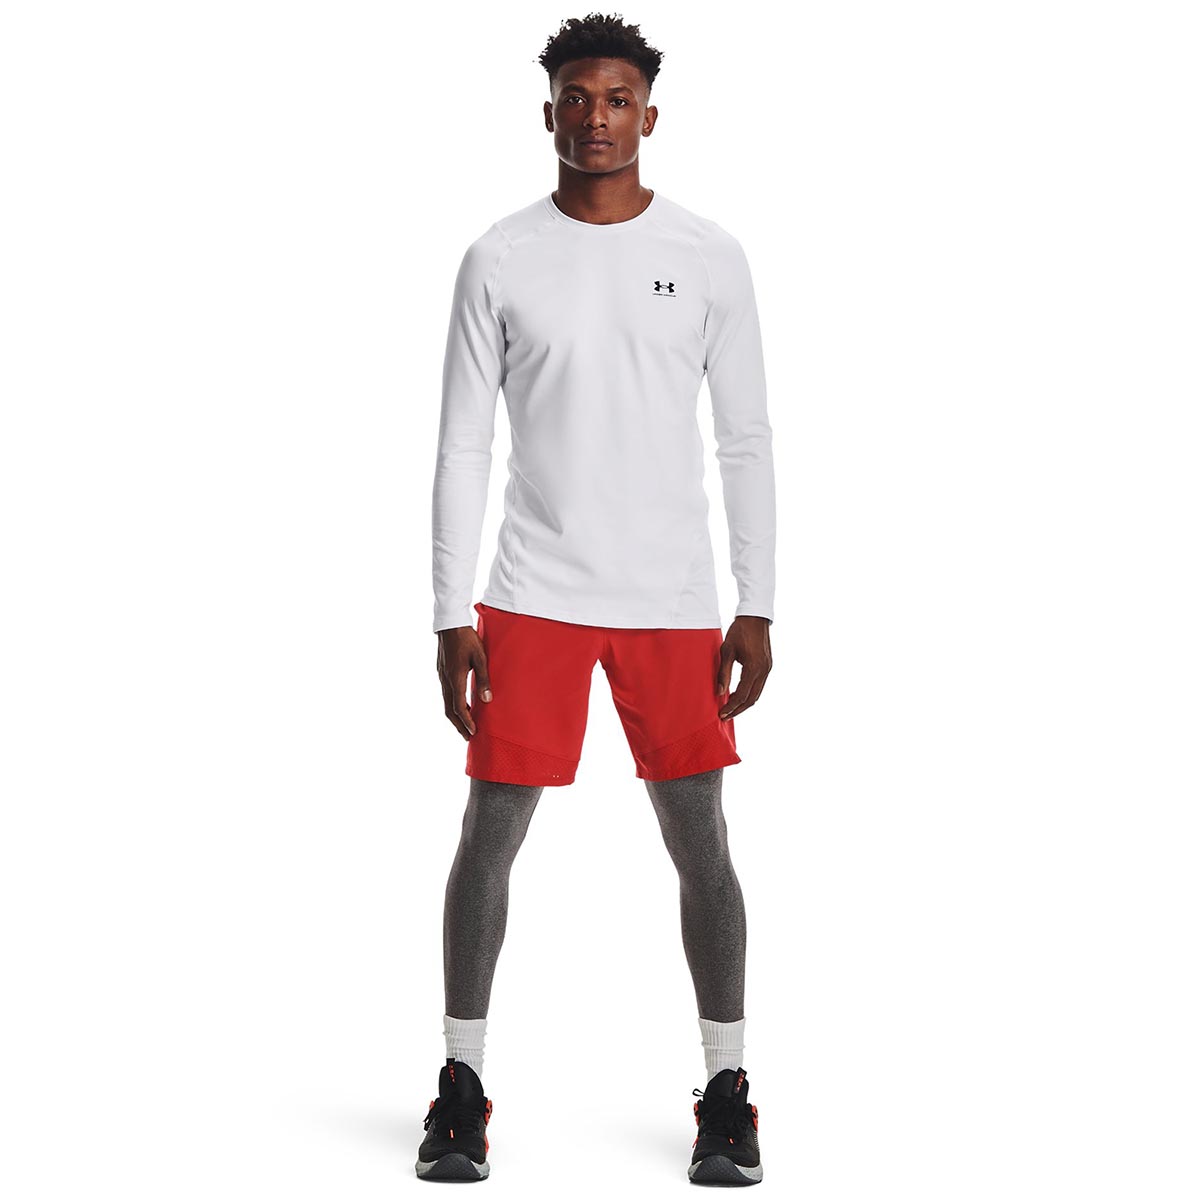 UNDER ARMOUR - COLDGEAR FITTED CREW SHIRT